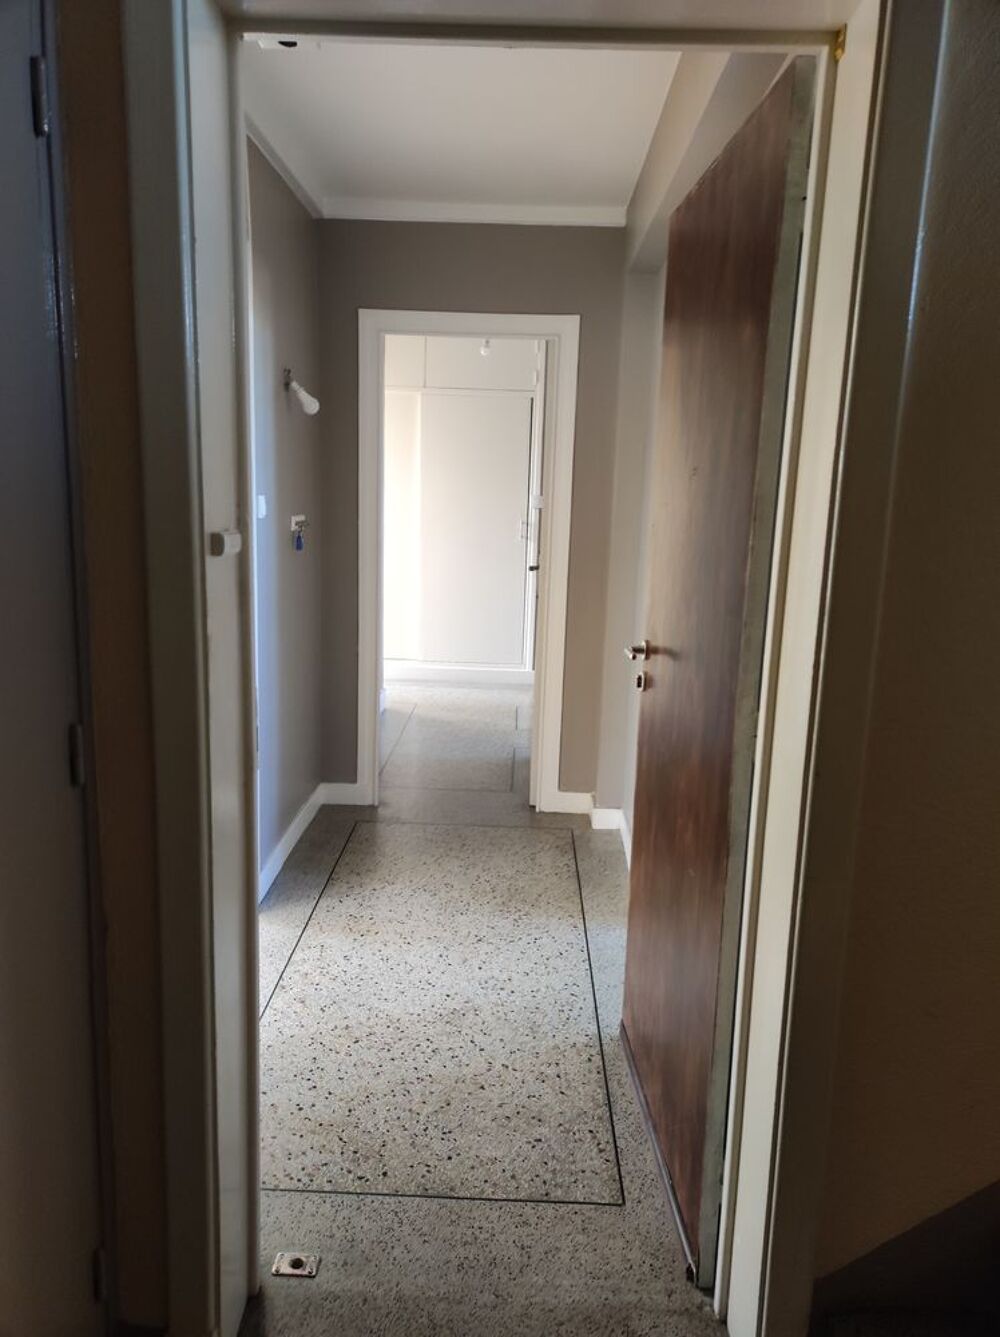 Location Appartement Appartement T5 3 chambres vue parc MONTJOLY CHAMALIERES Chamalires